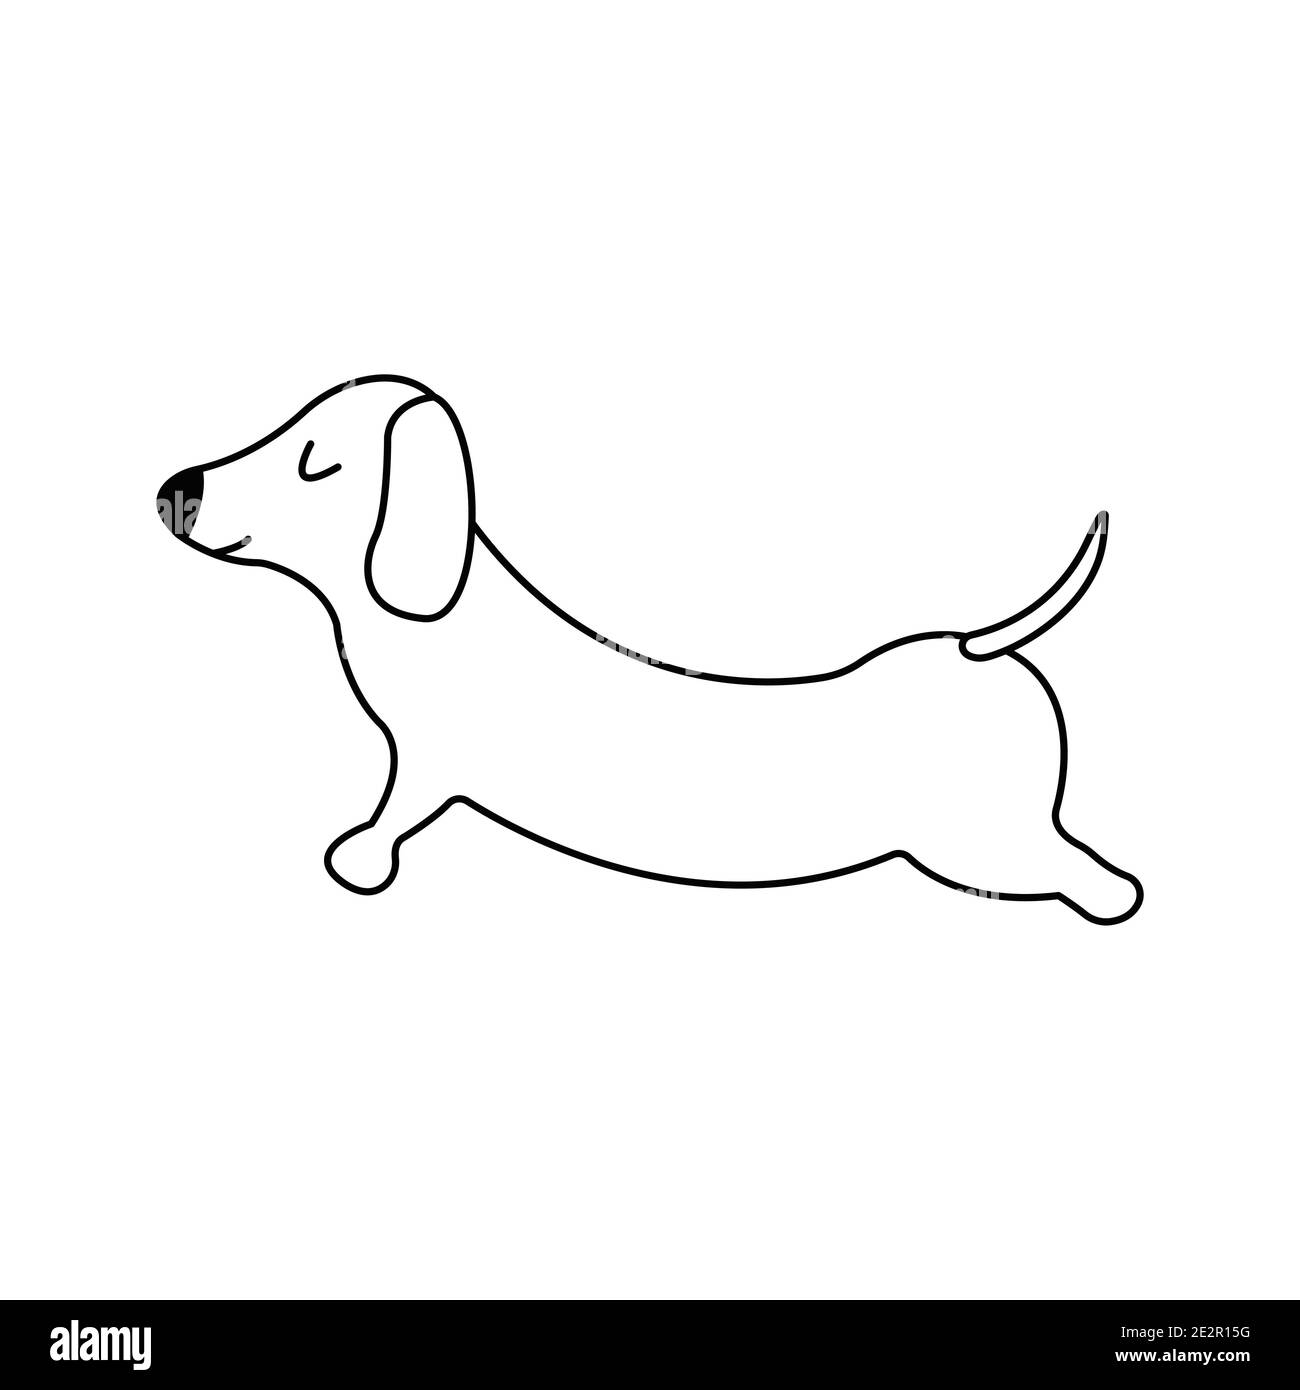 Dachshund practices yoga back bending. Yoga dog, relaxation and sports. Vector isolated doodle illustration. Hand drawn animal black and white Stock Vector